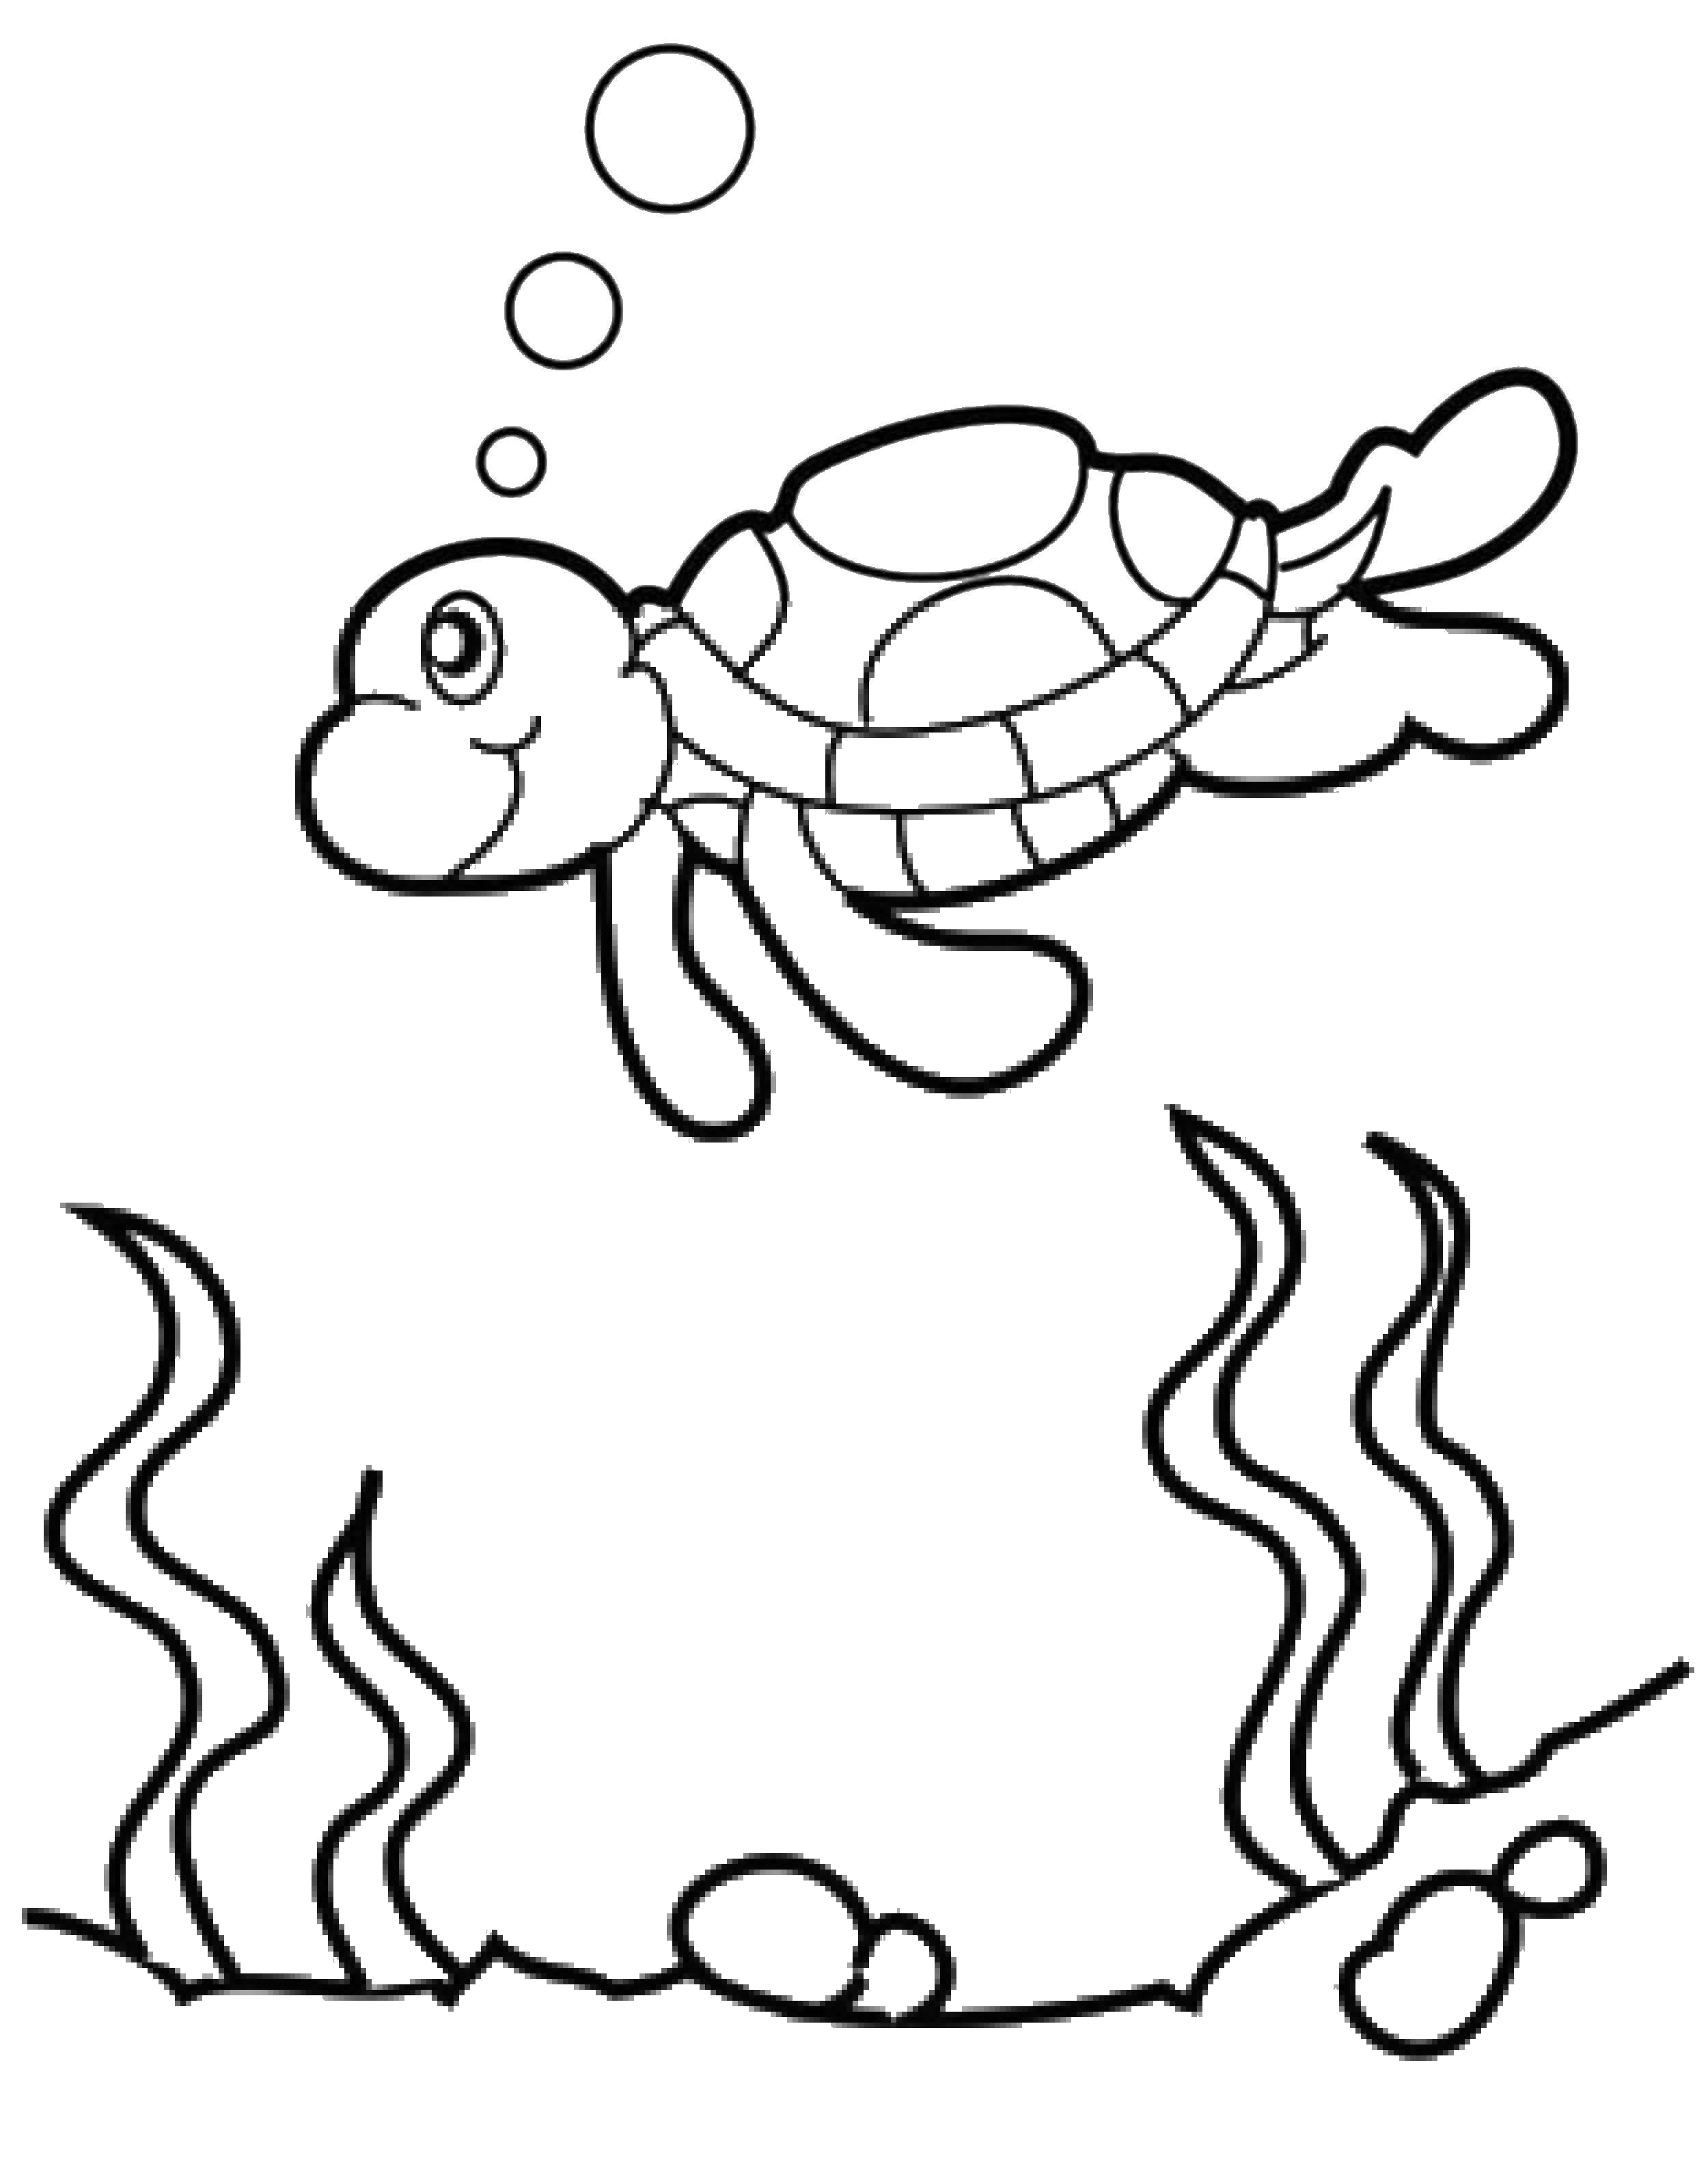 Coloring Turtle in the sea. Category coloring. Tags:  the sea turtle swimming in the sea.